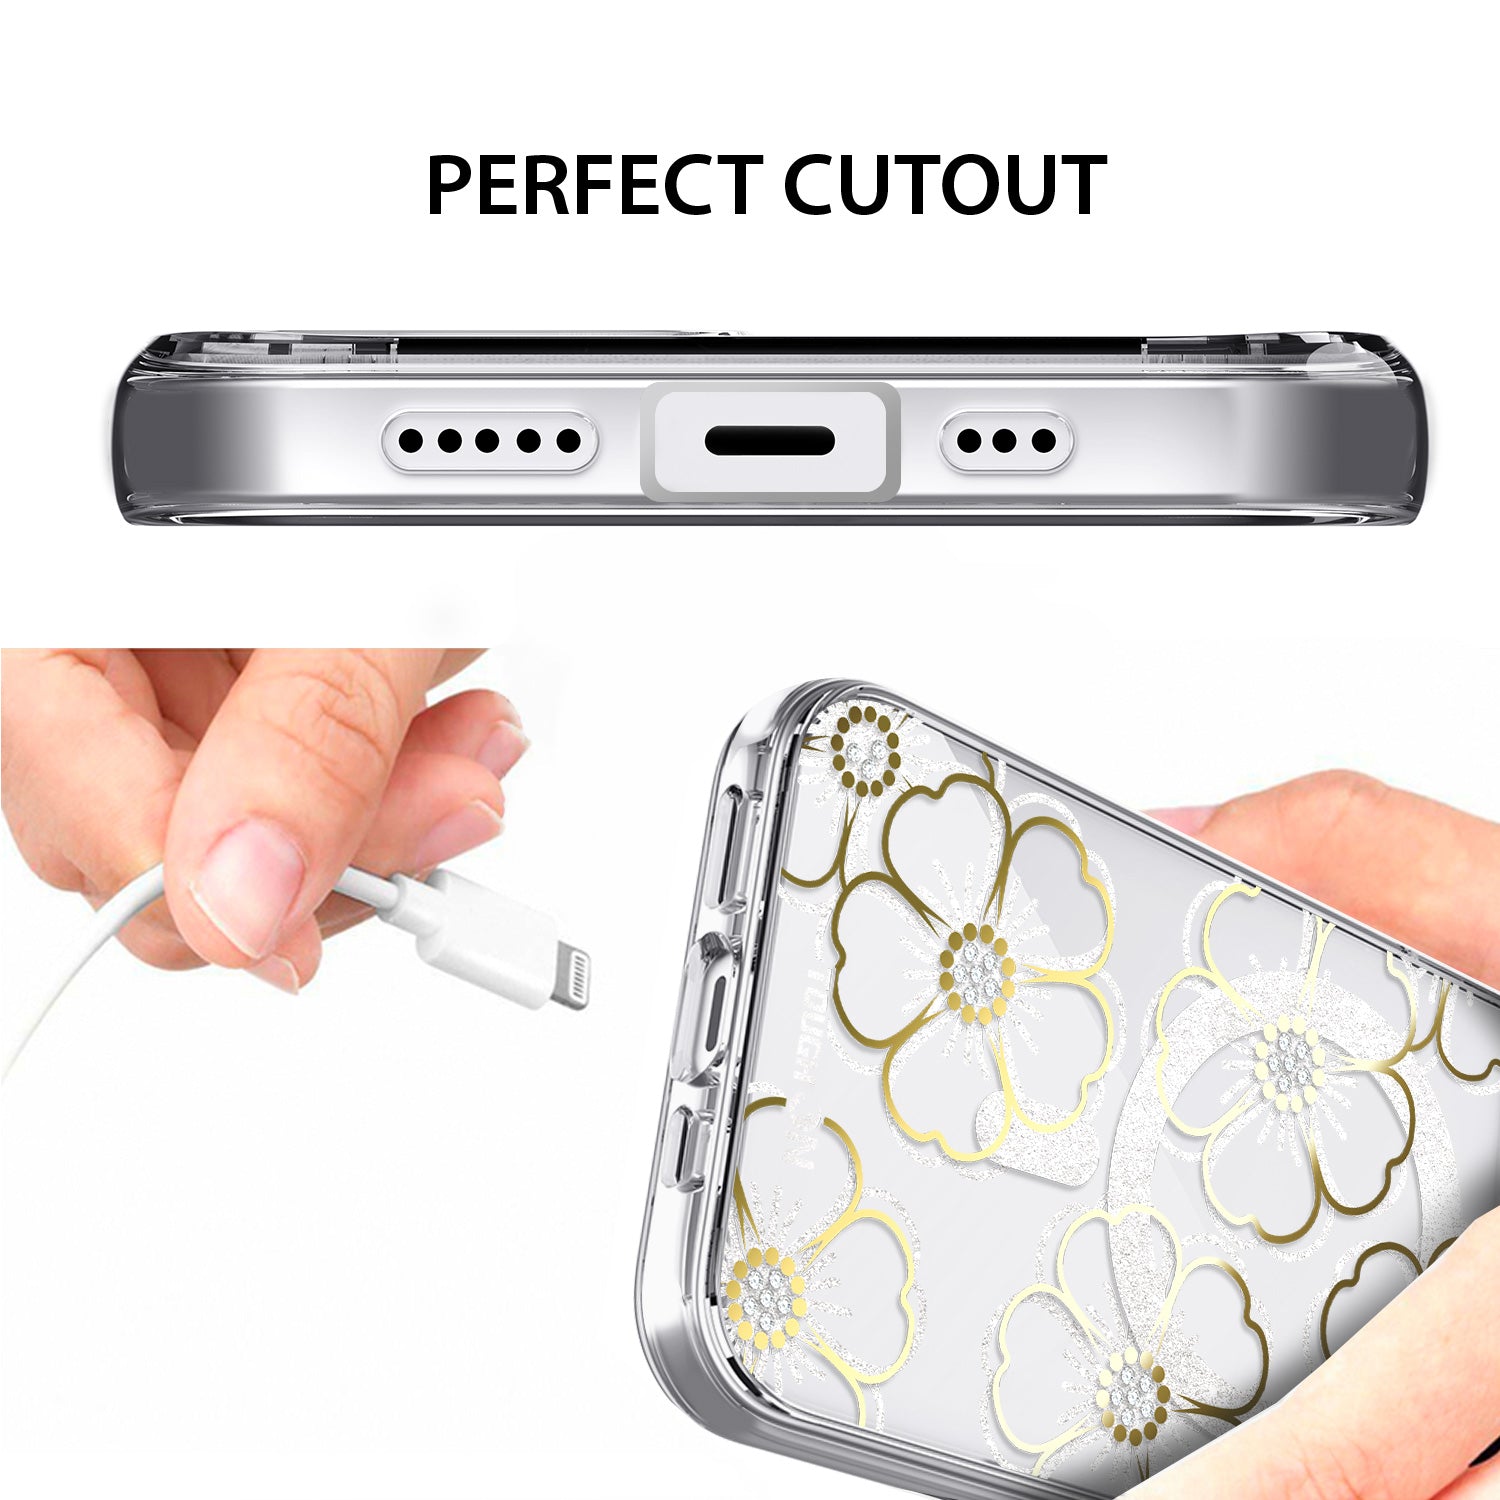 Tough On iPhone 13 Case Floral Emerald With Magsafe